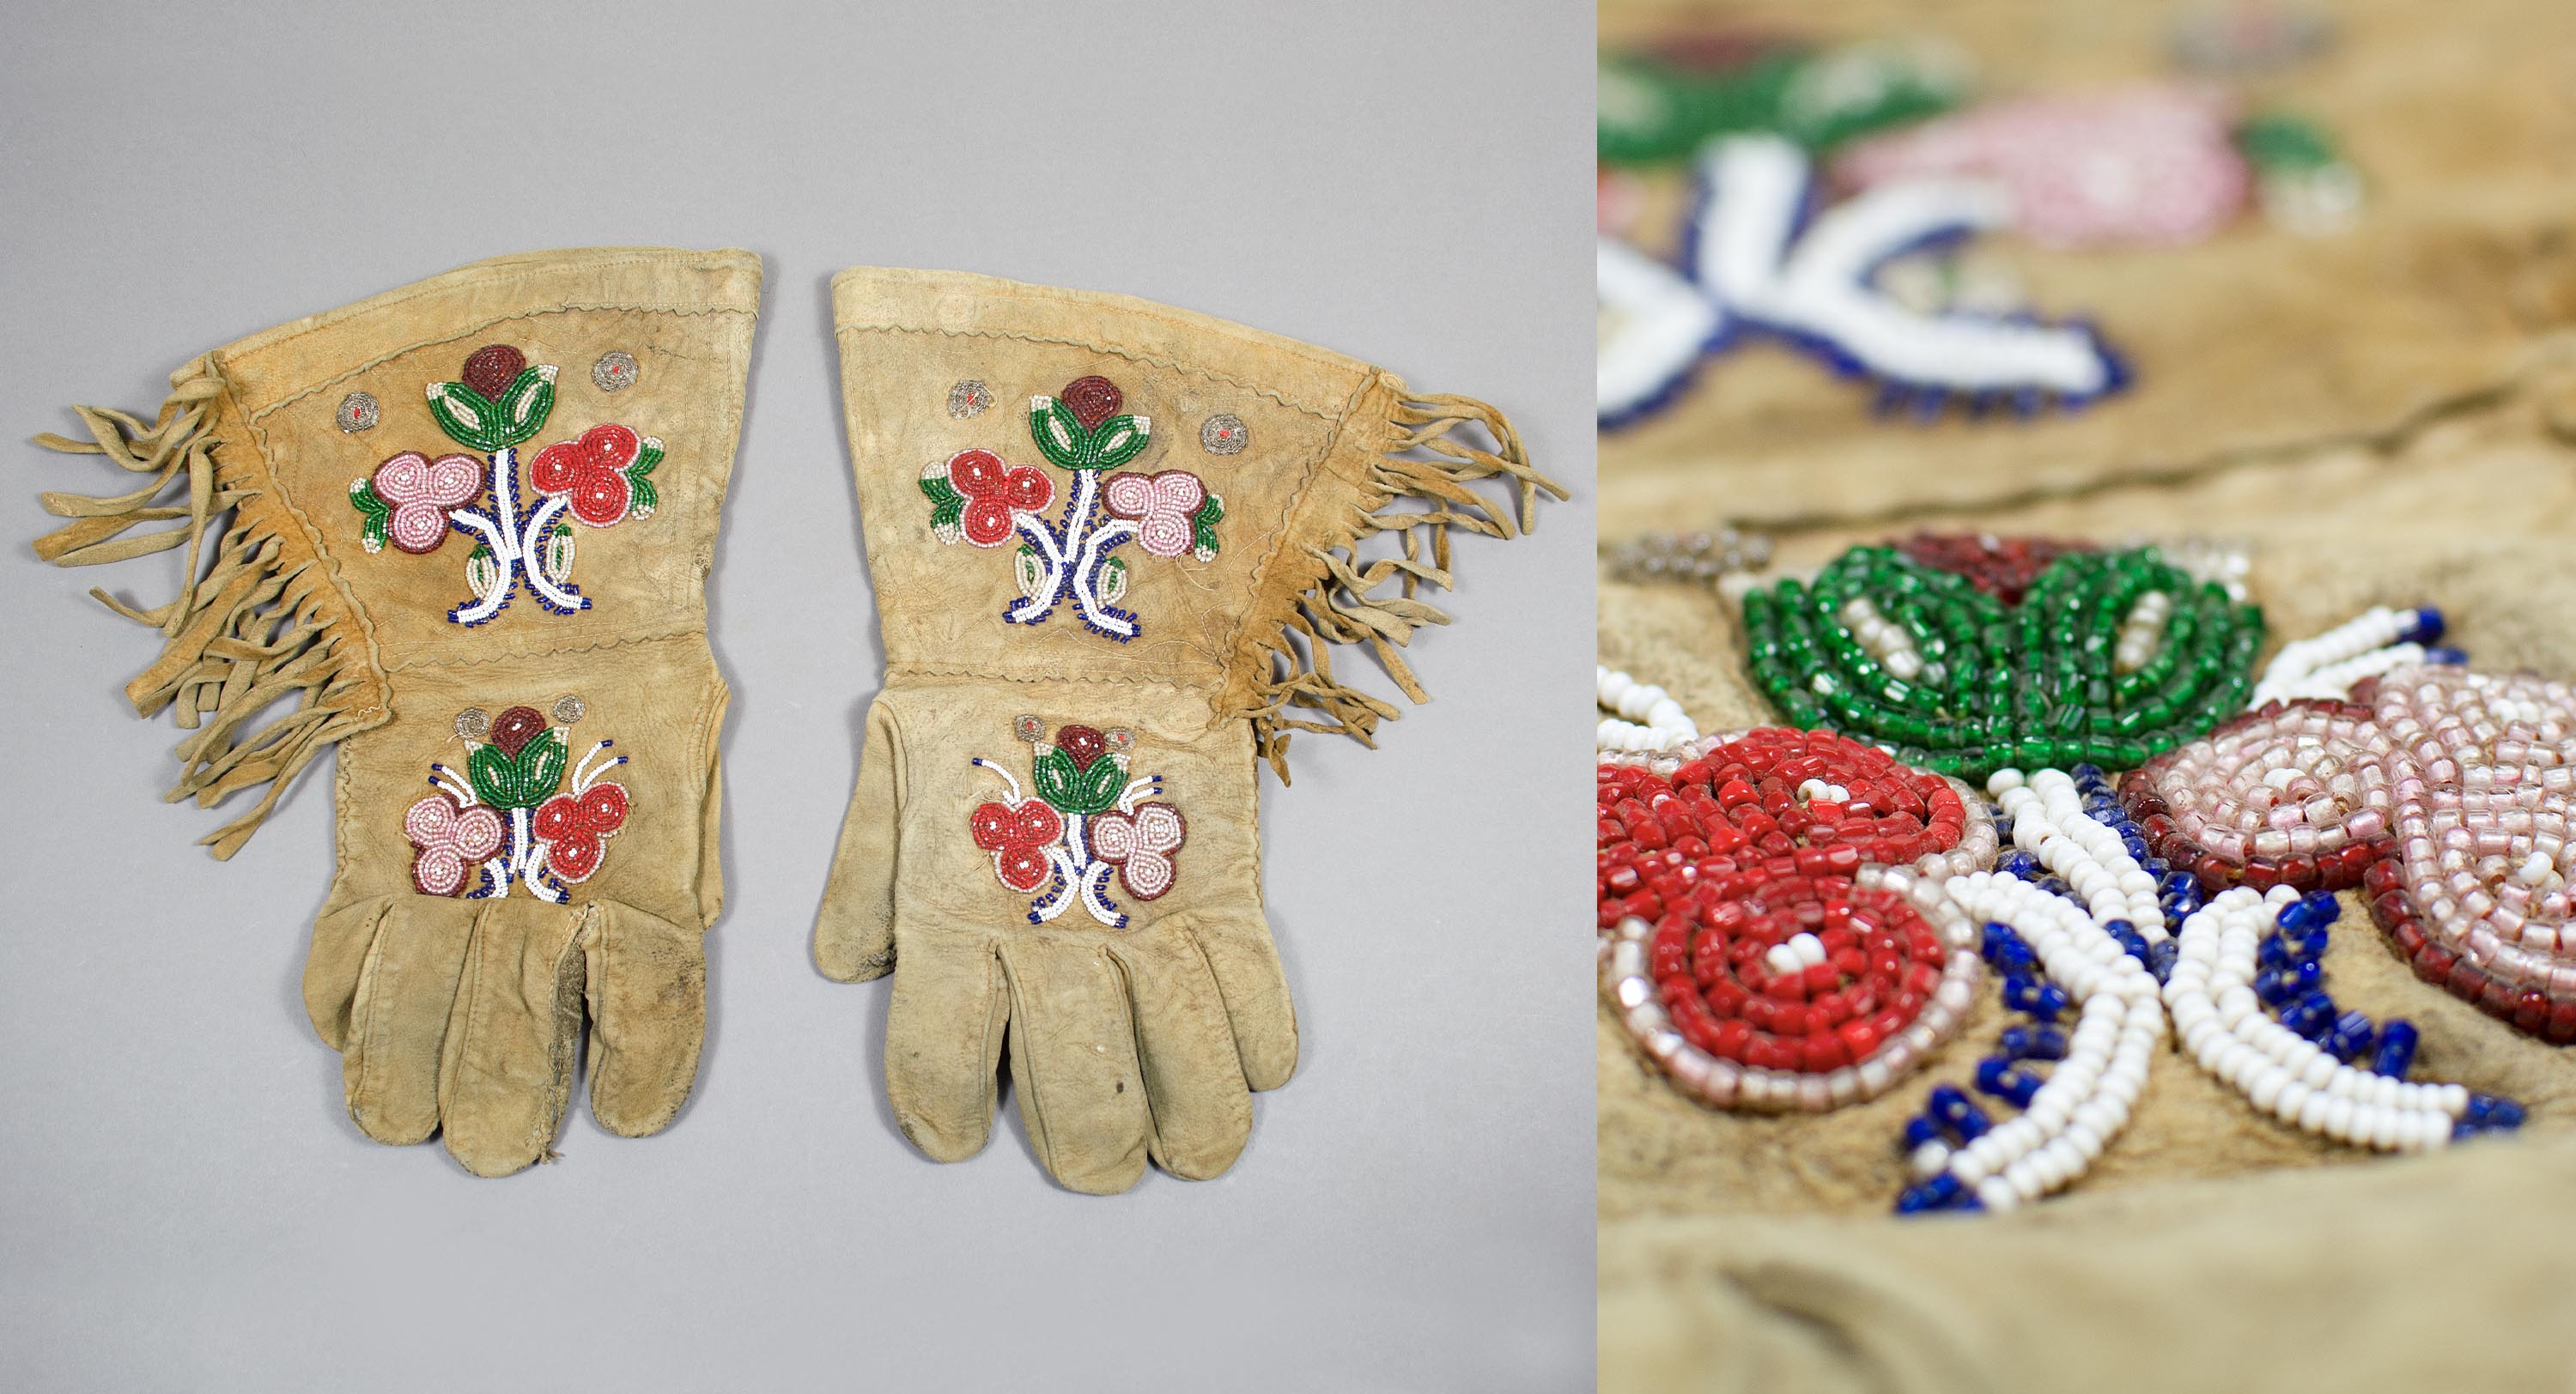 A pair of men's beaded gauntlet gloves with fringe on the left and a close up of the beading on the right